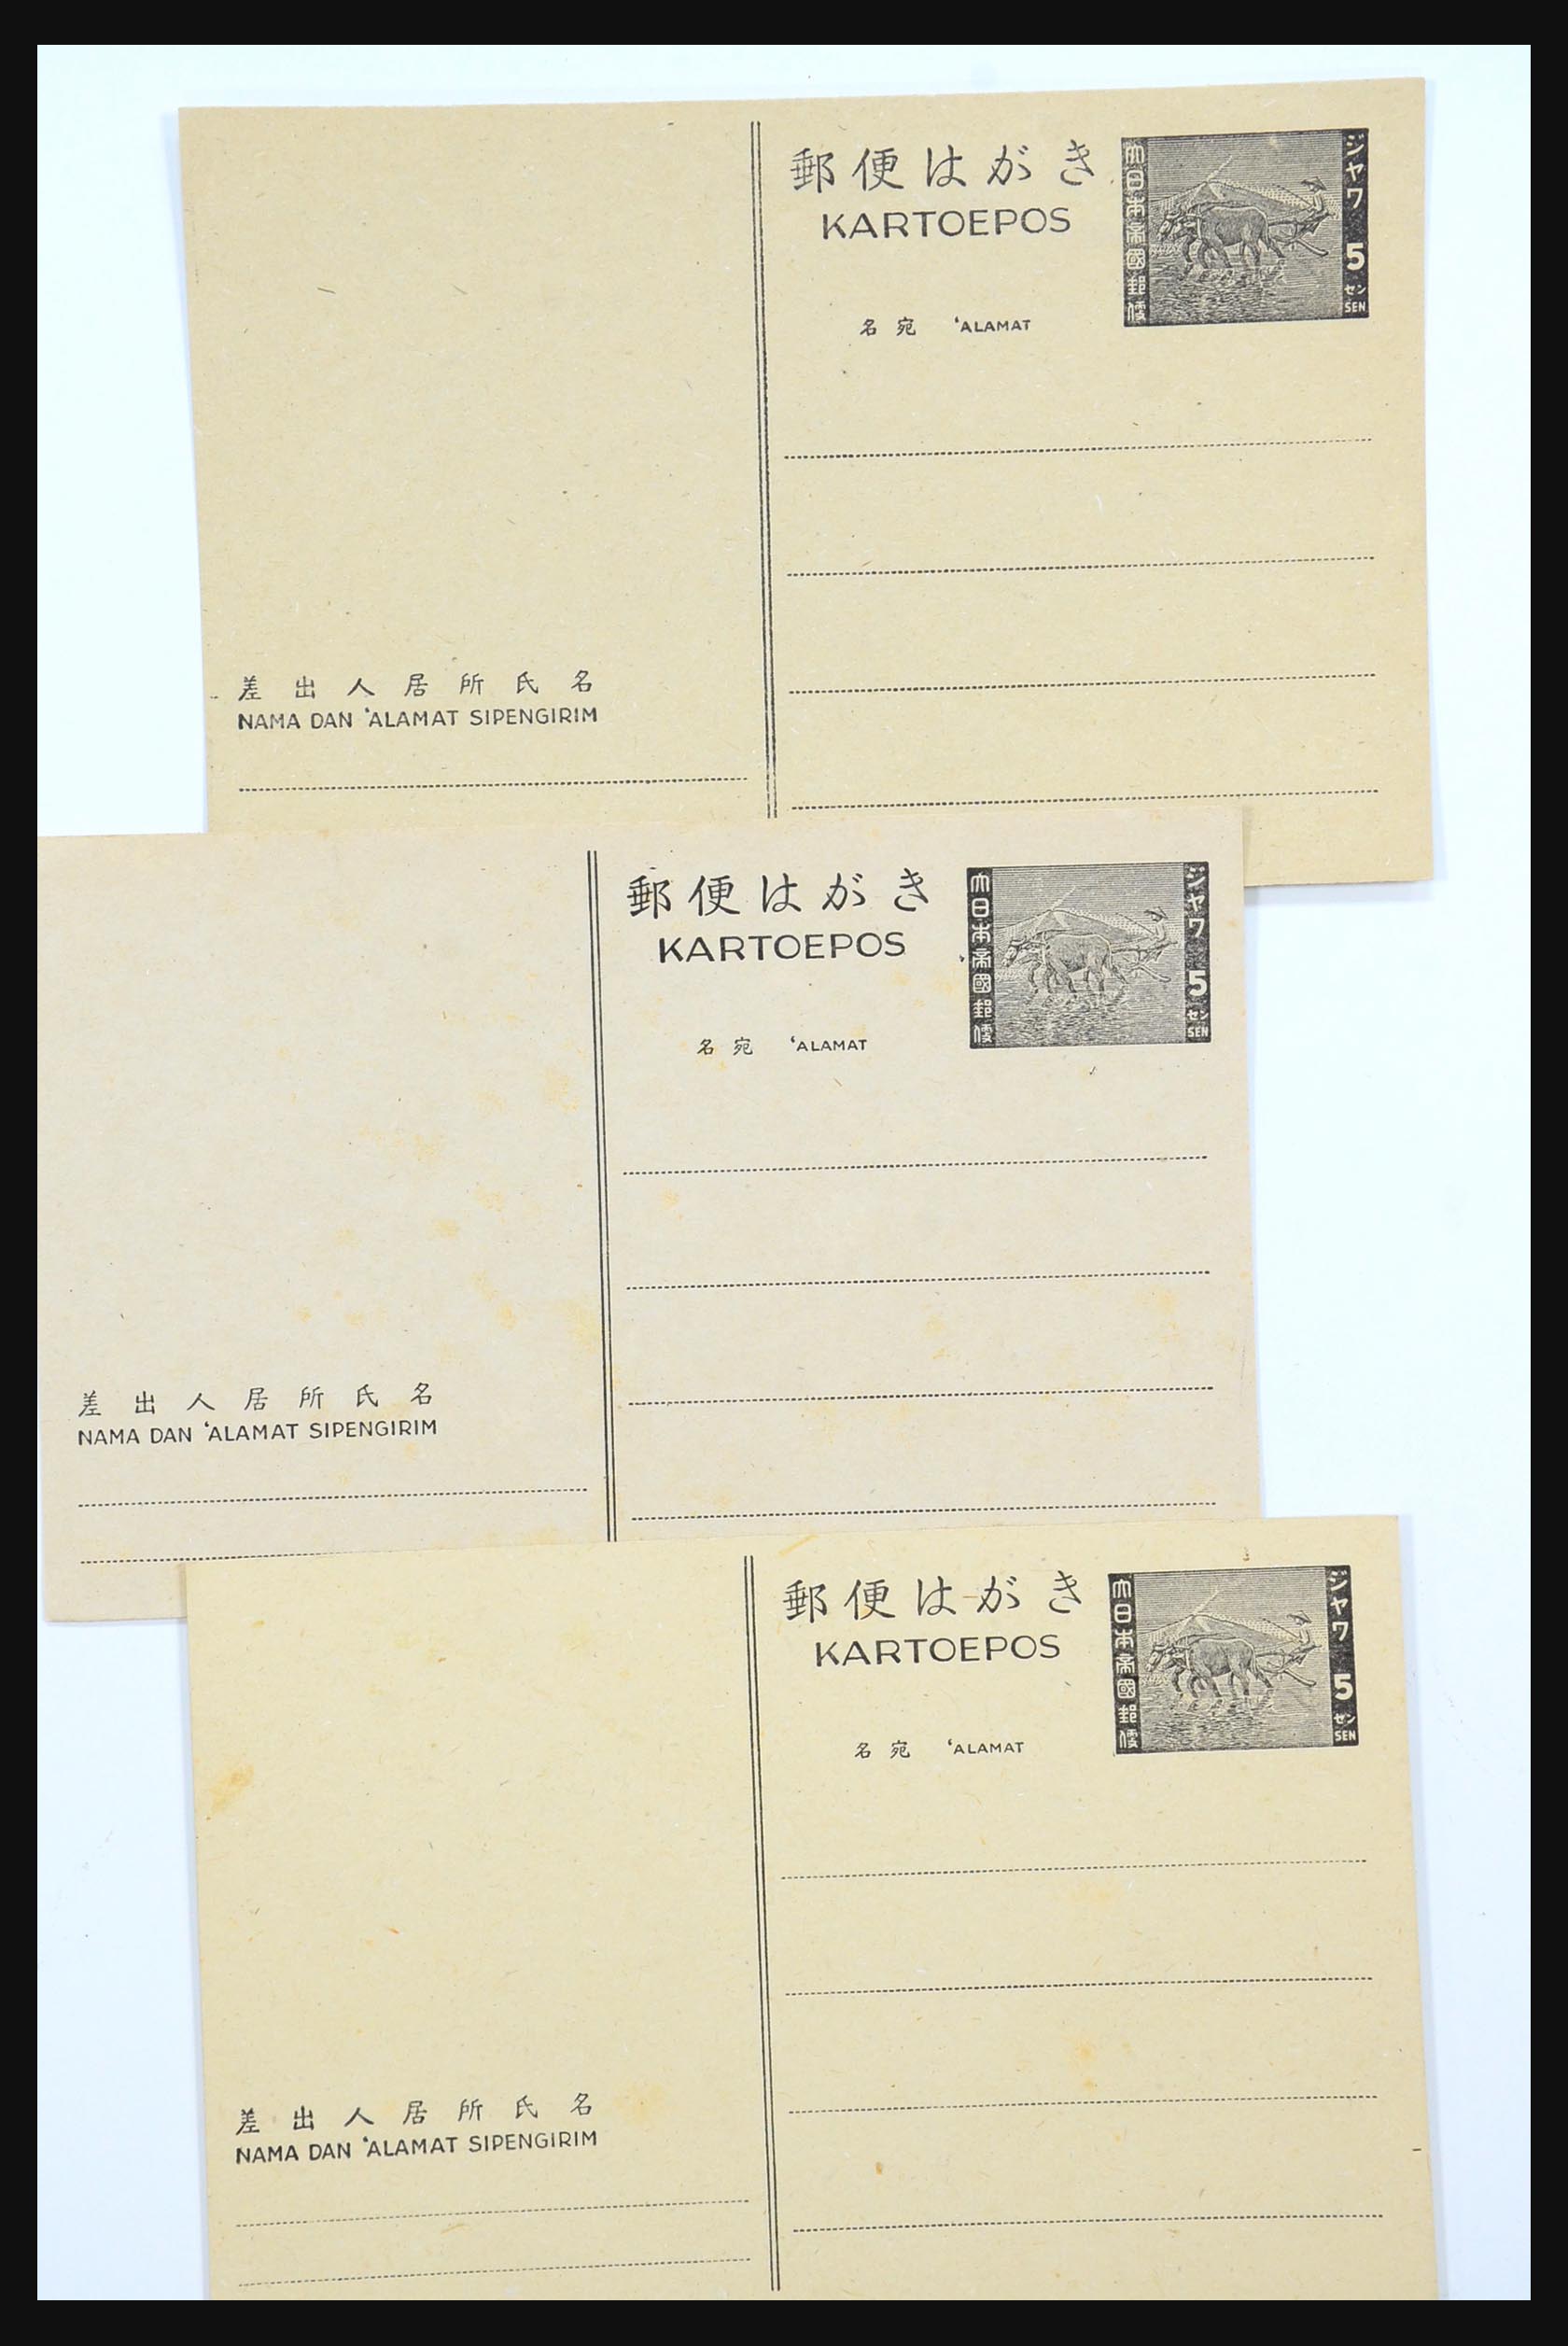 31362 074 - 31362 Netherlands Indies Japanese occupation covers 1942-1945.